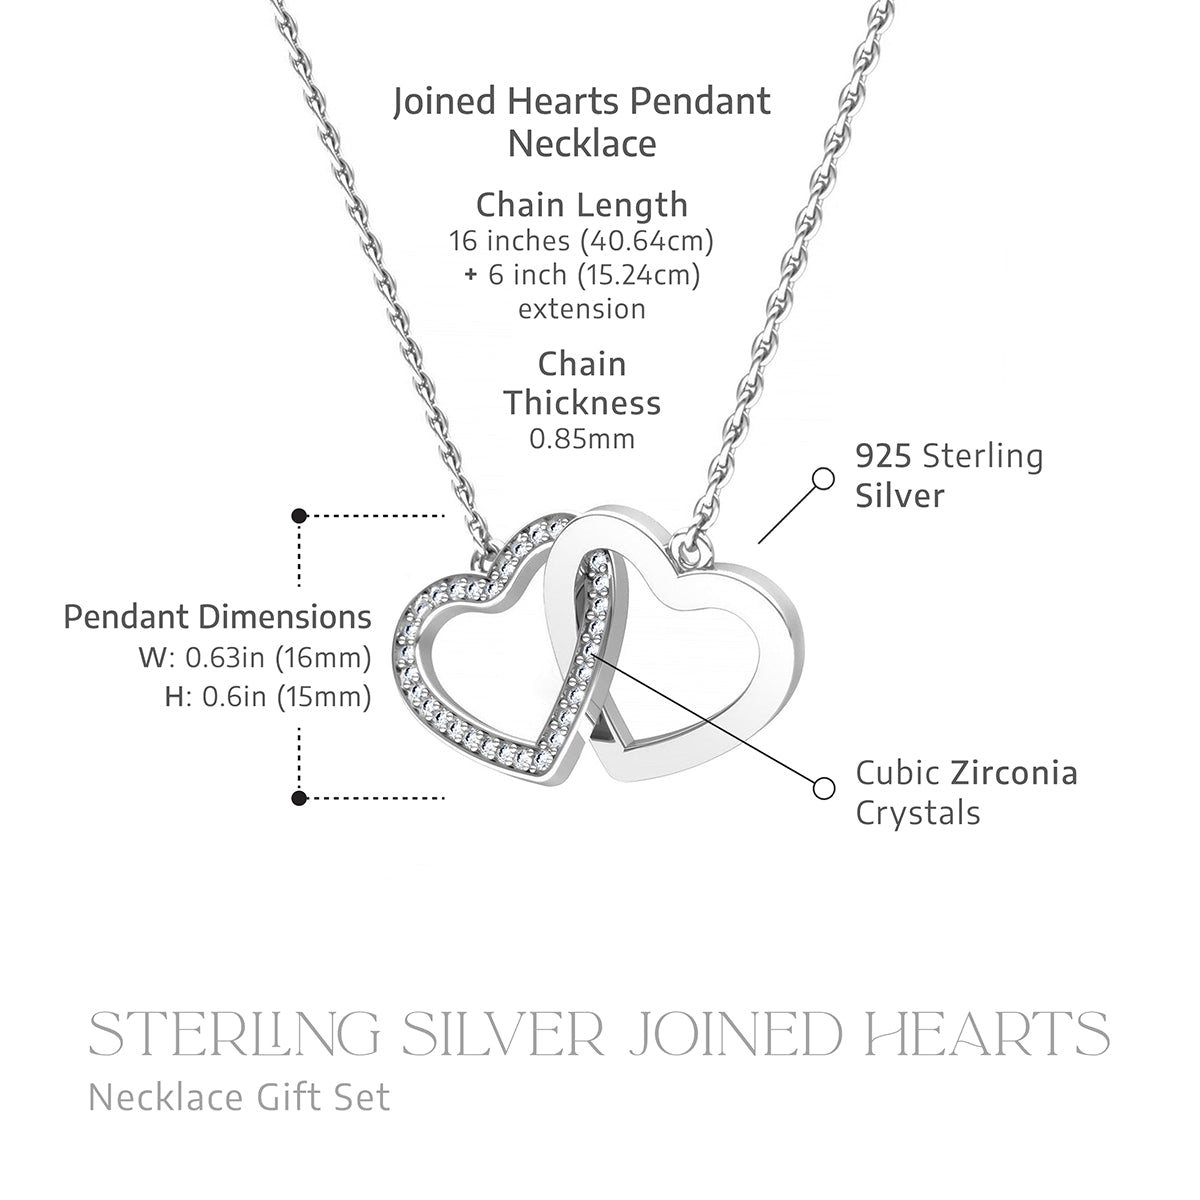 To an Amazing Mother, We Got This! - Sterling Silver Joined Hearts Necklace Gift Set